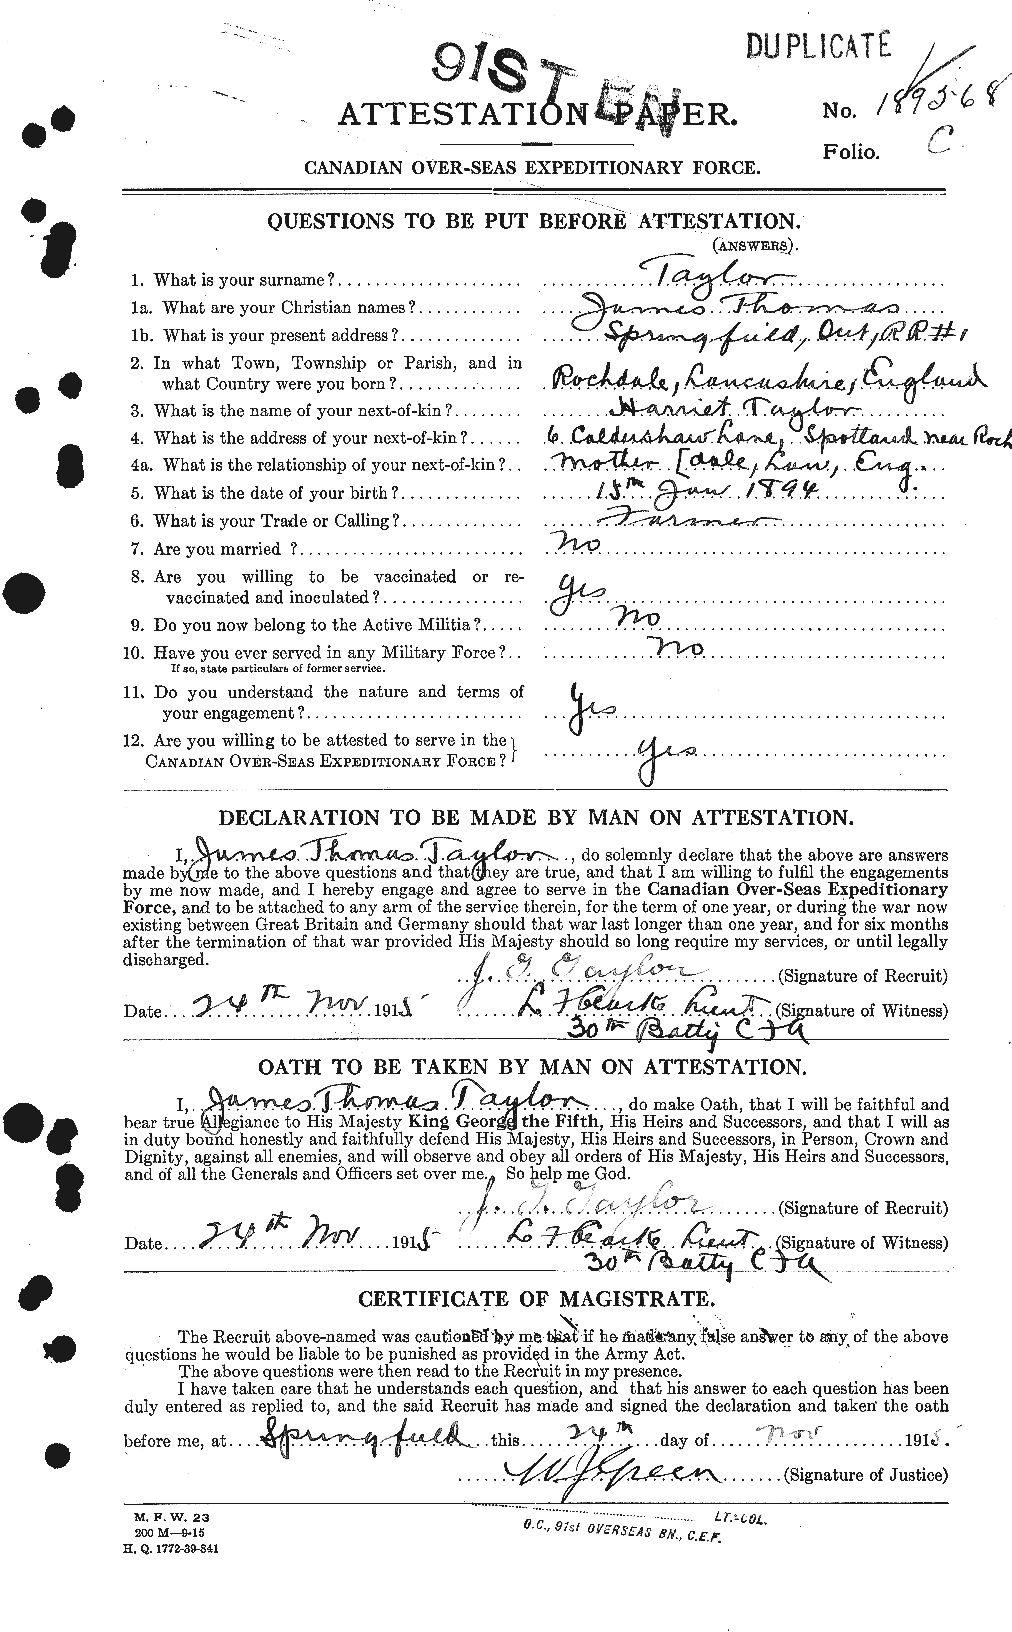 Personnel Records of the First World War - CEF 626958a